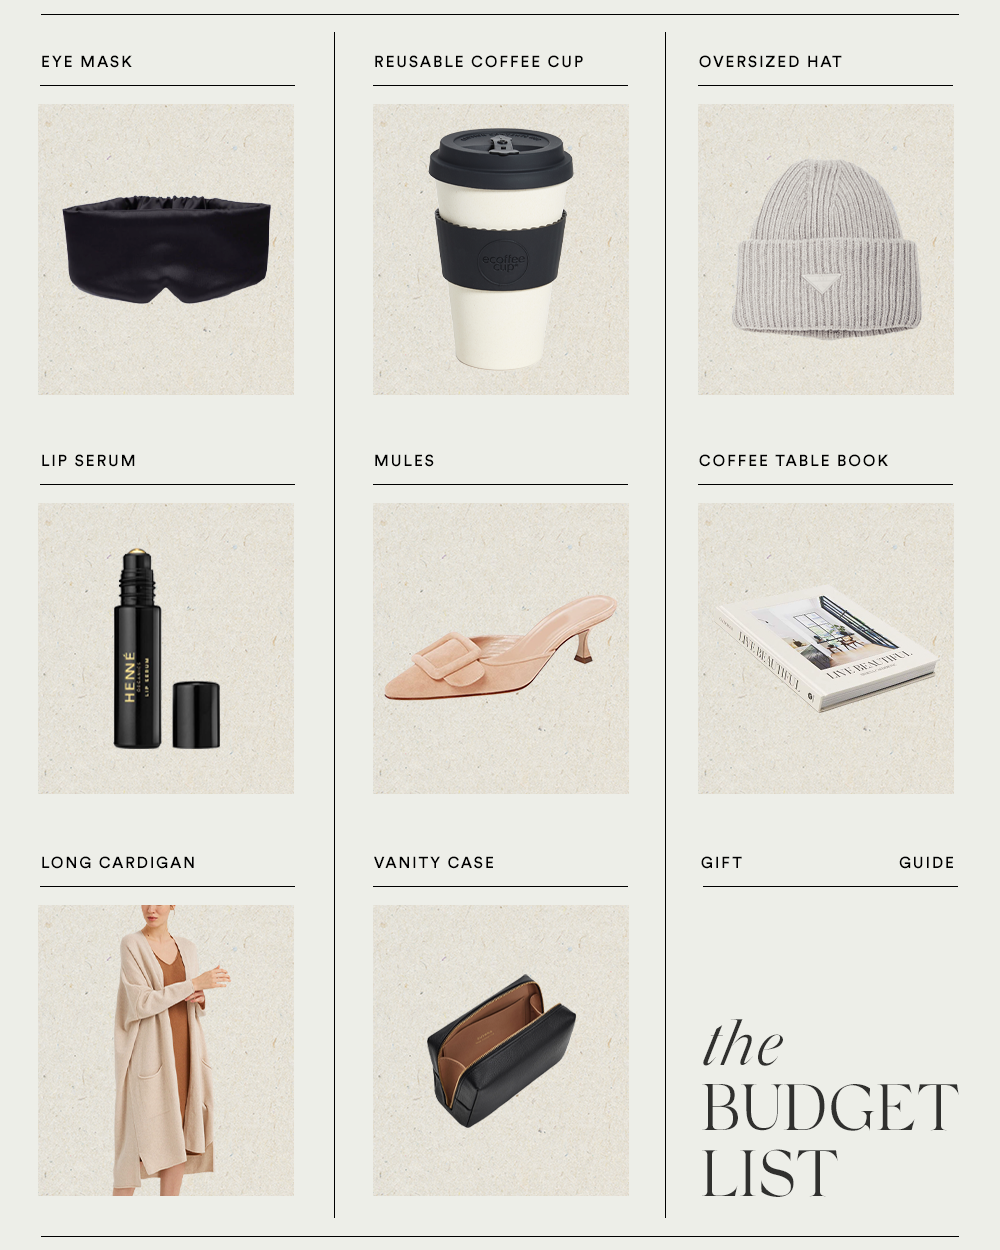 GIFT GUIDE: The Budget List